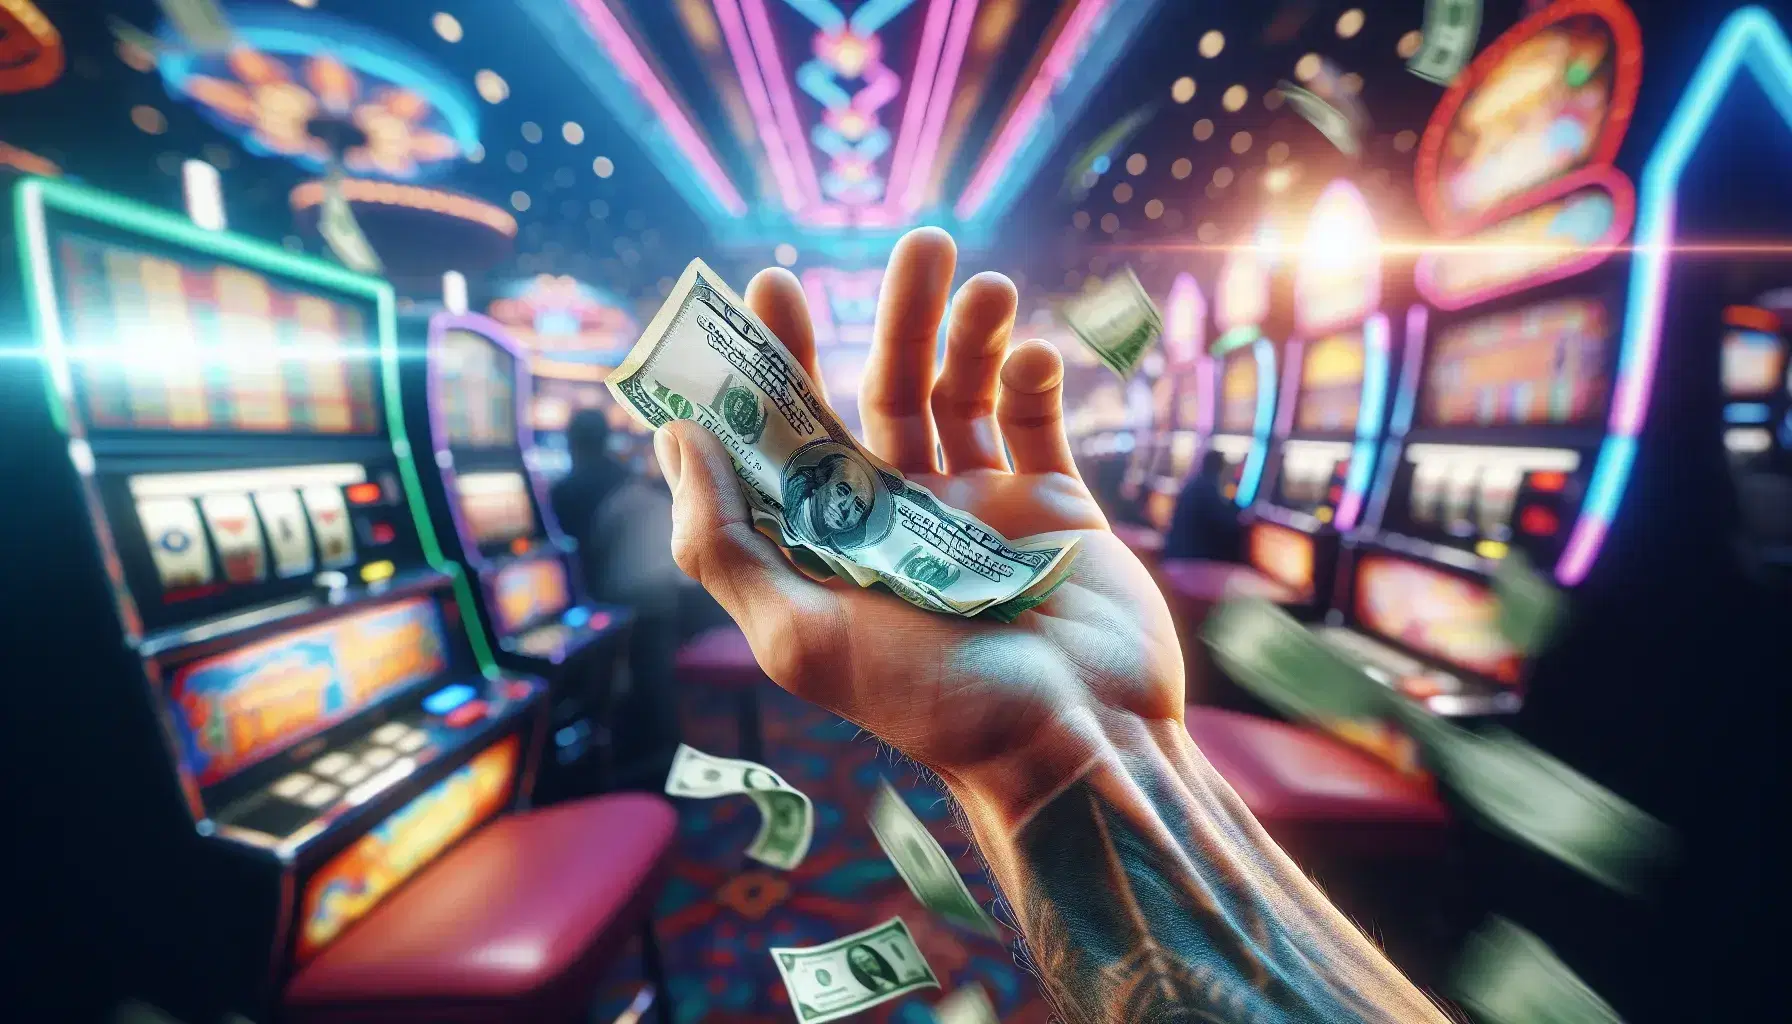 Hands in the foreground with a crumpled dollar banknote and the other open hand, bright blurred background of a casino with slot machine lights.